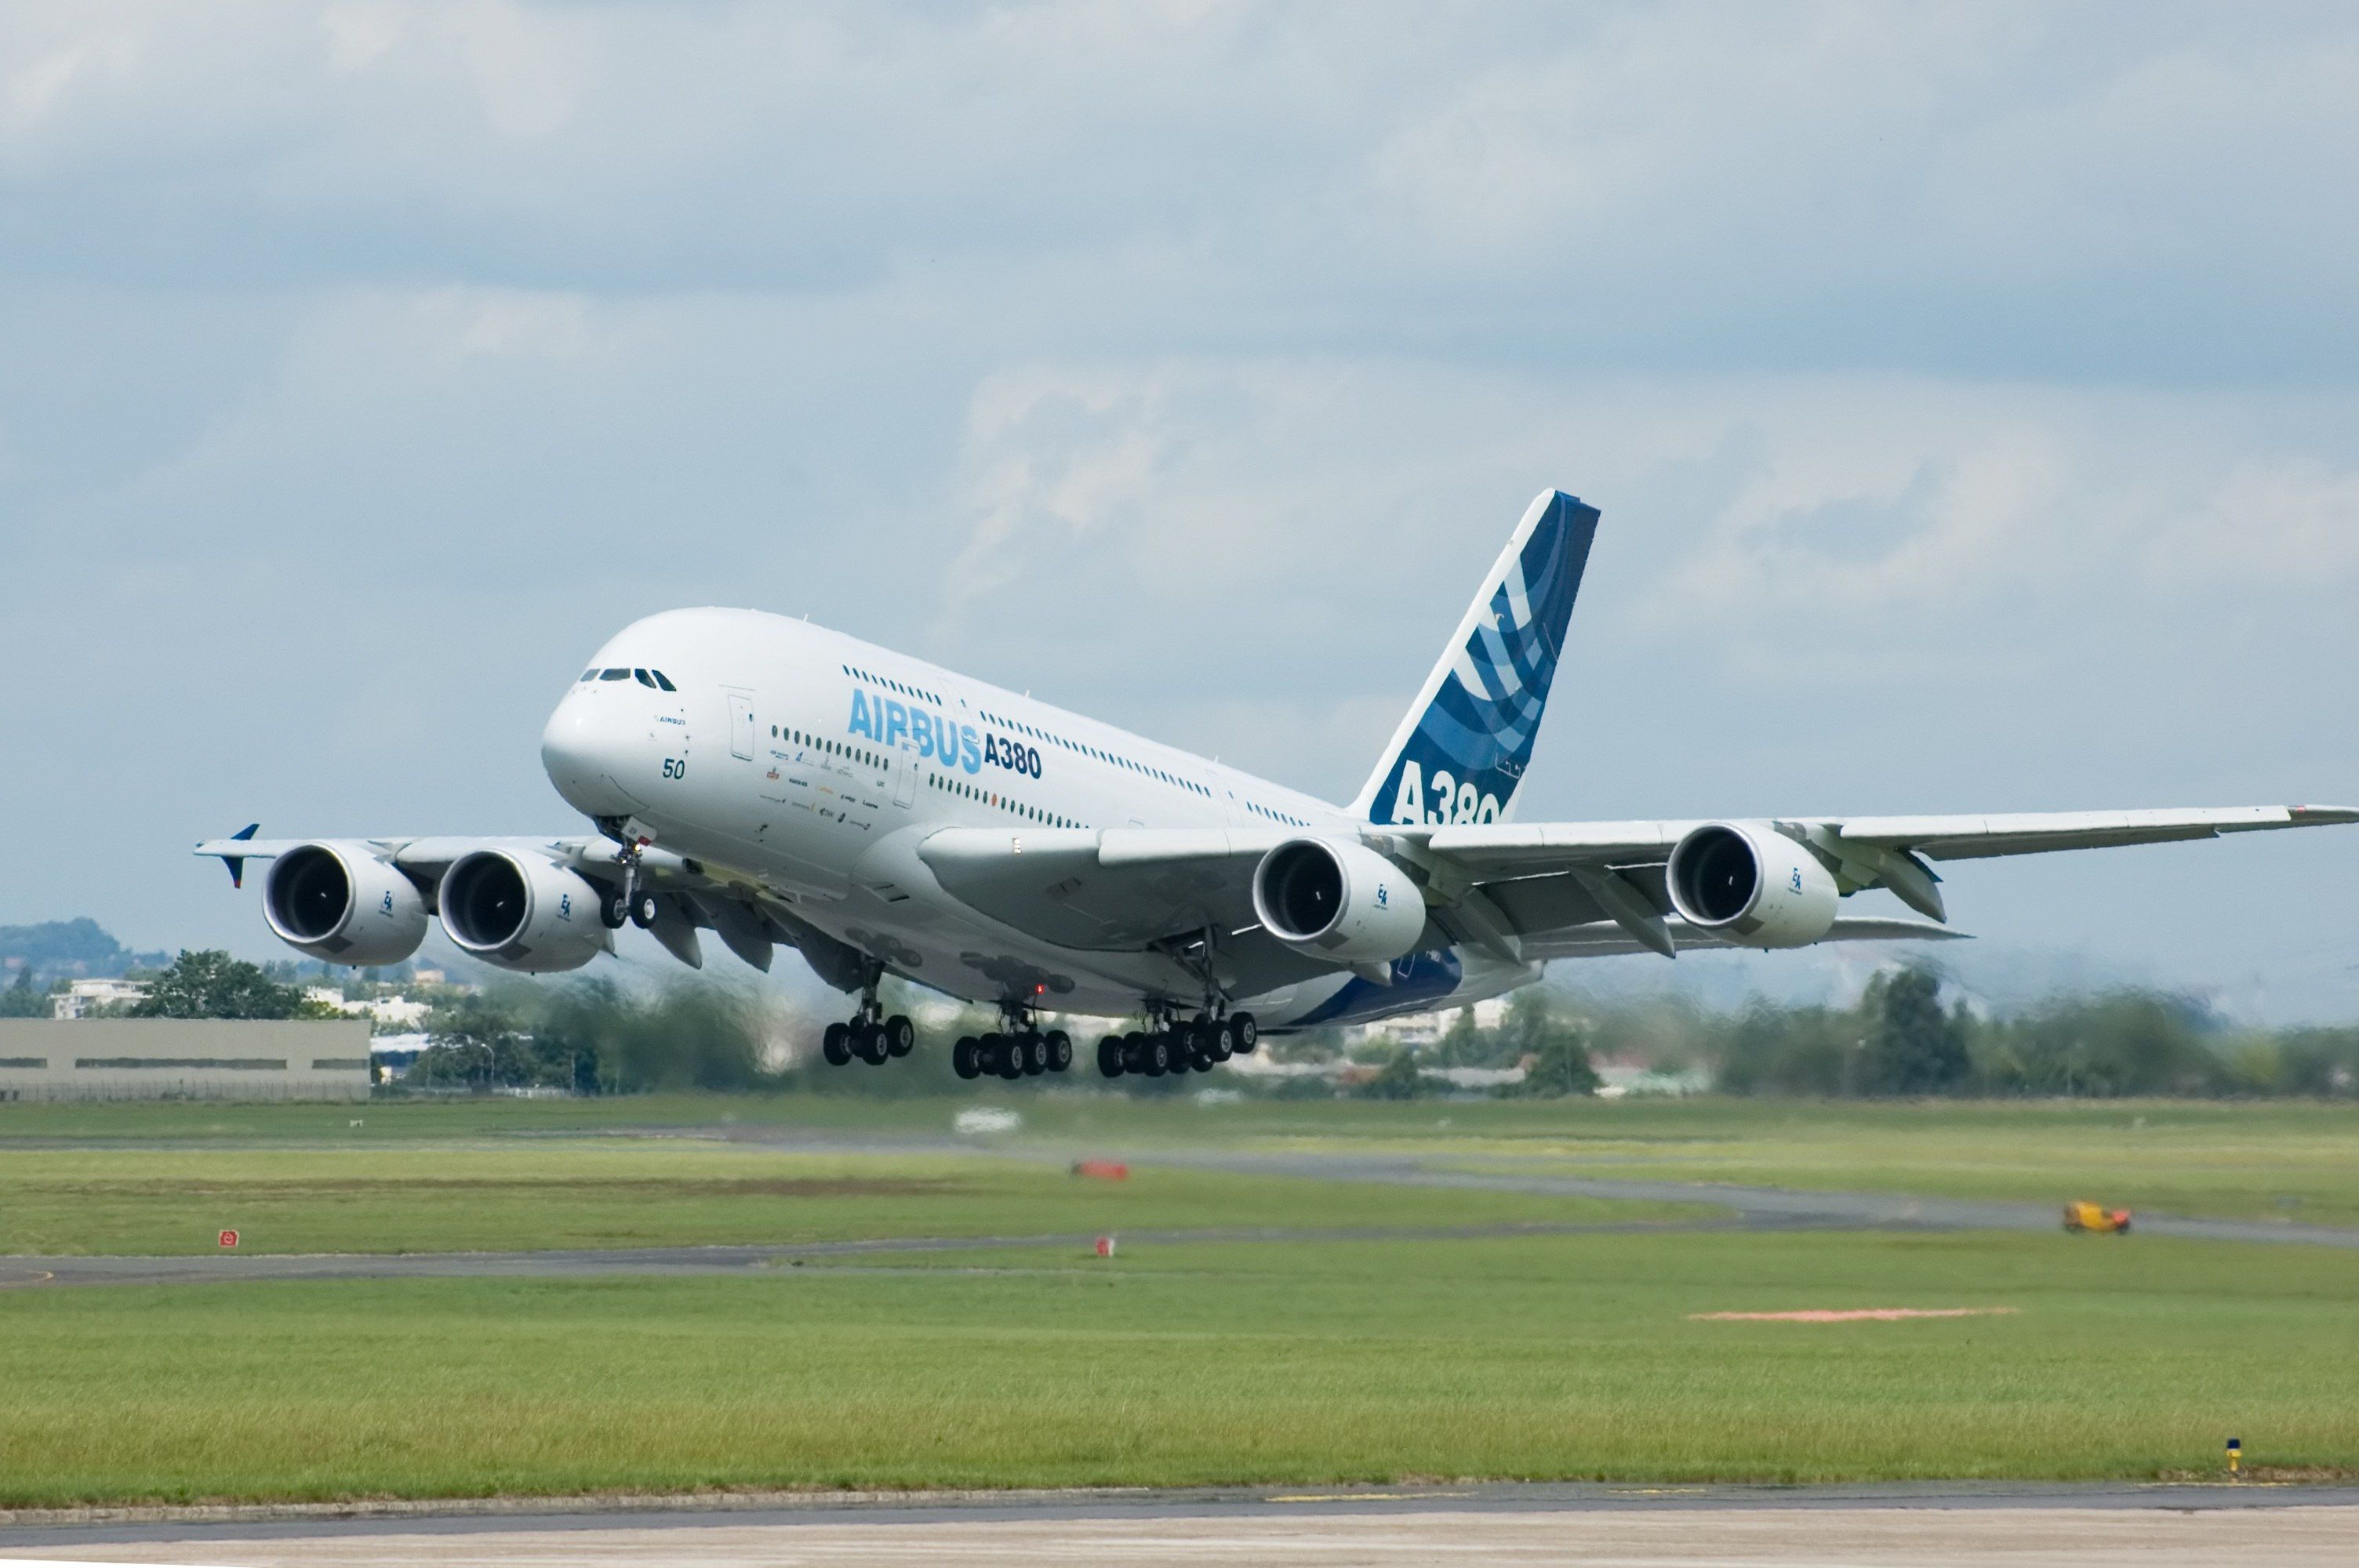 Airbus A380 HD Wallpaper For Photo